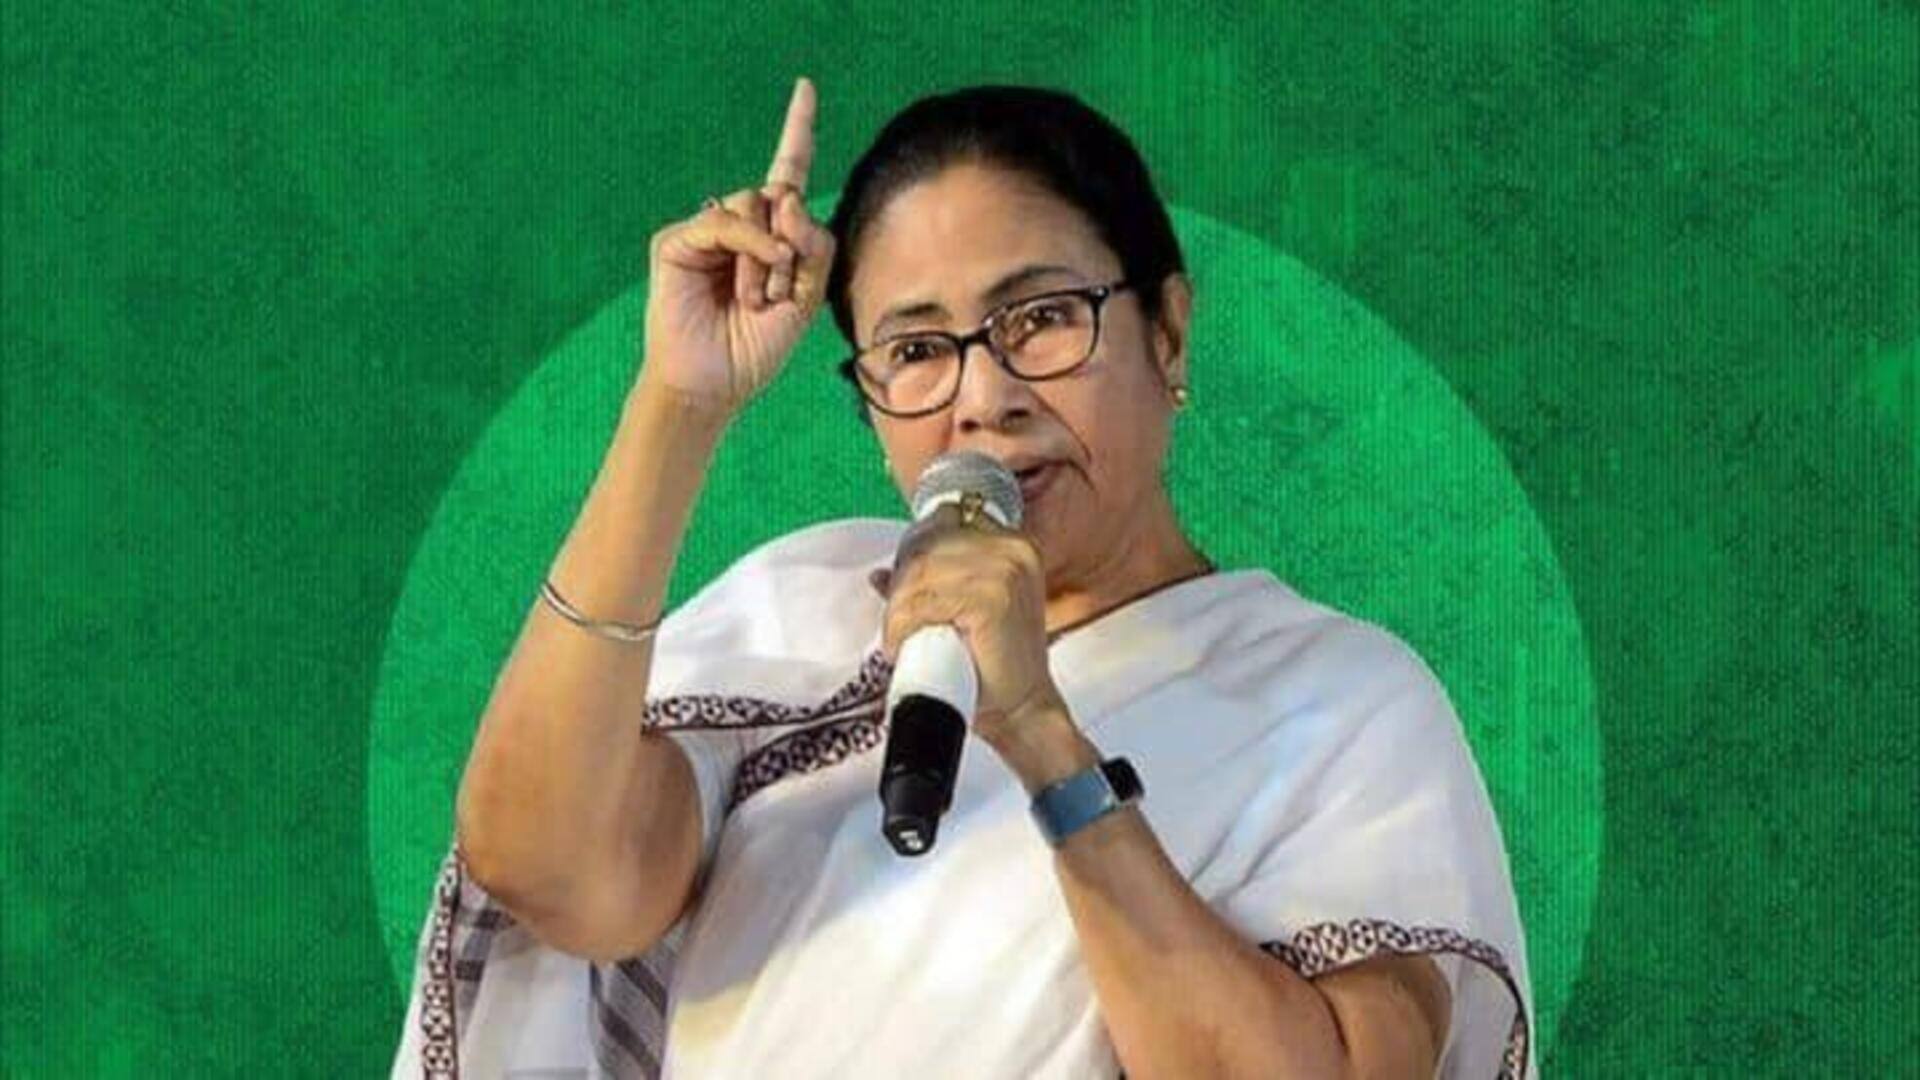 'NIA officials attacked villagers, not other way round': Mamata Banerjee